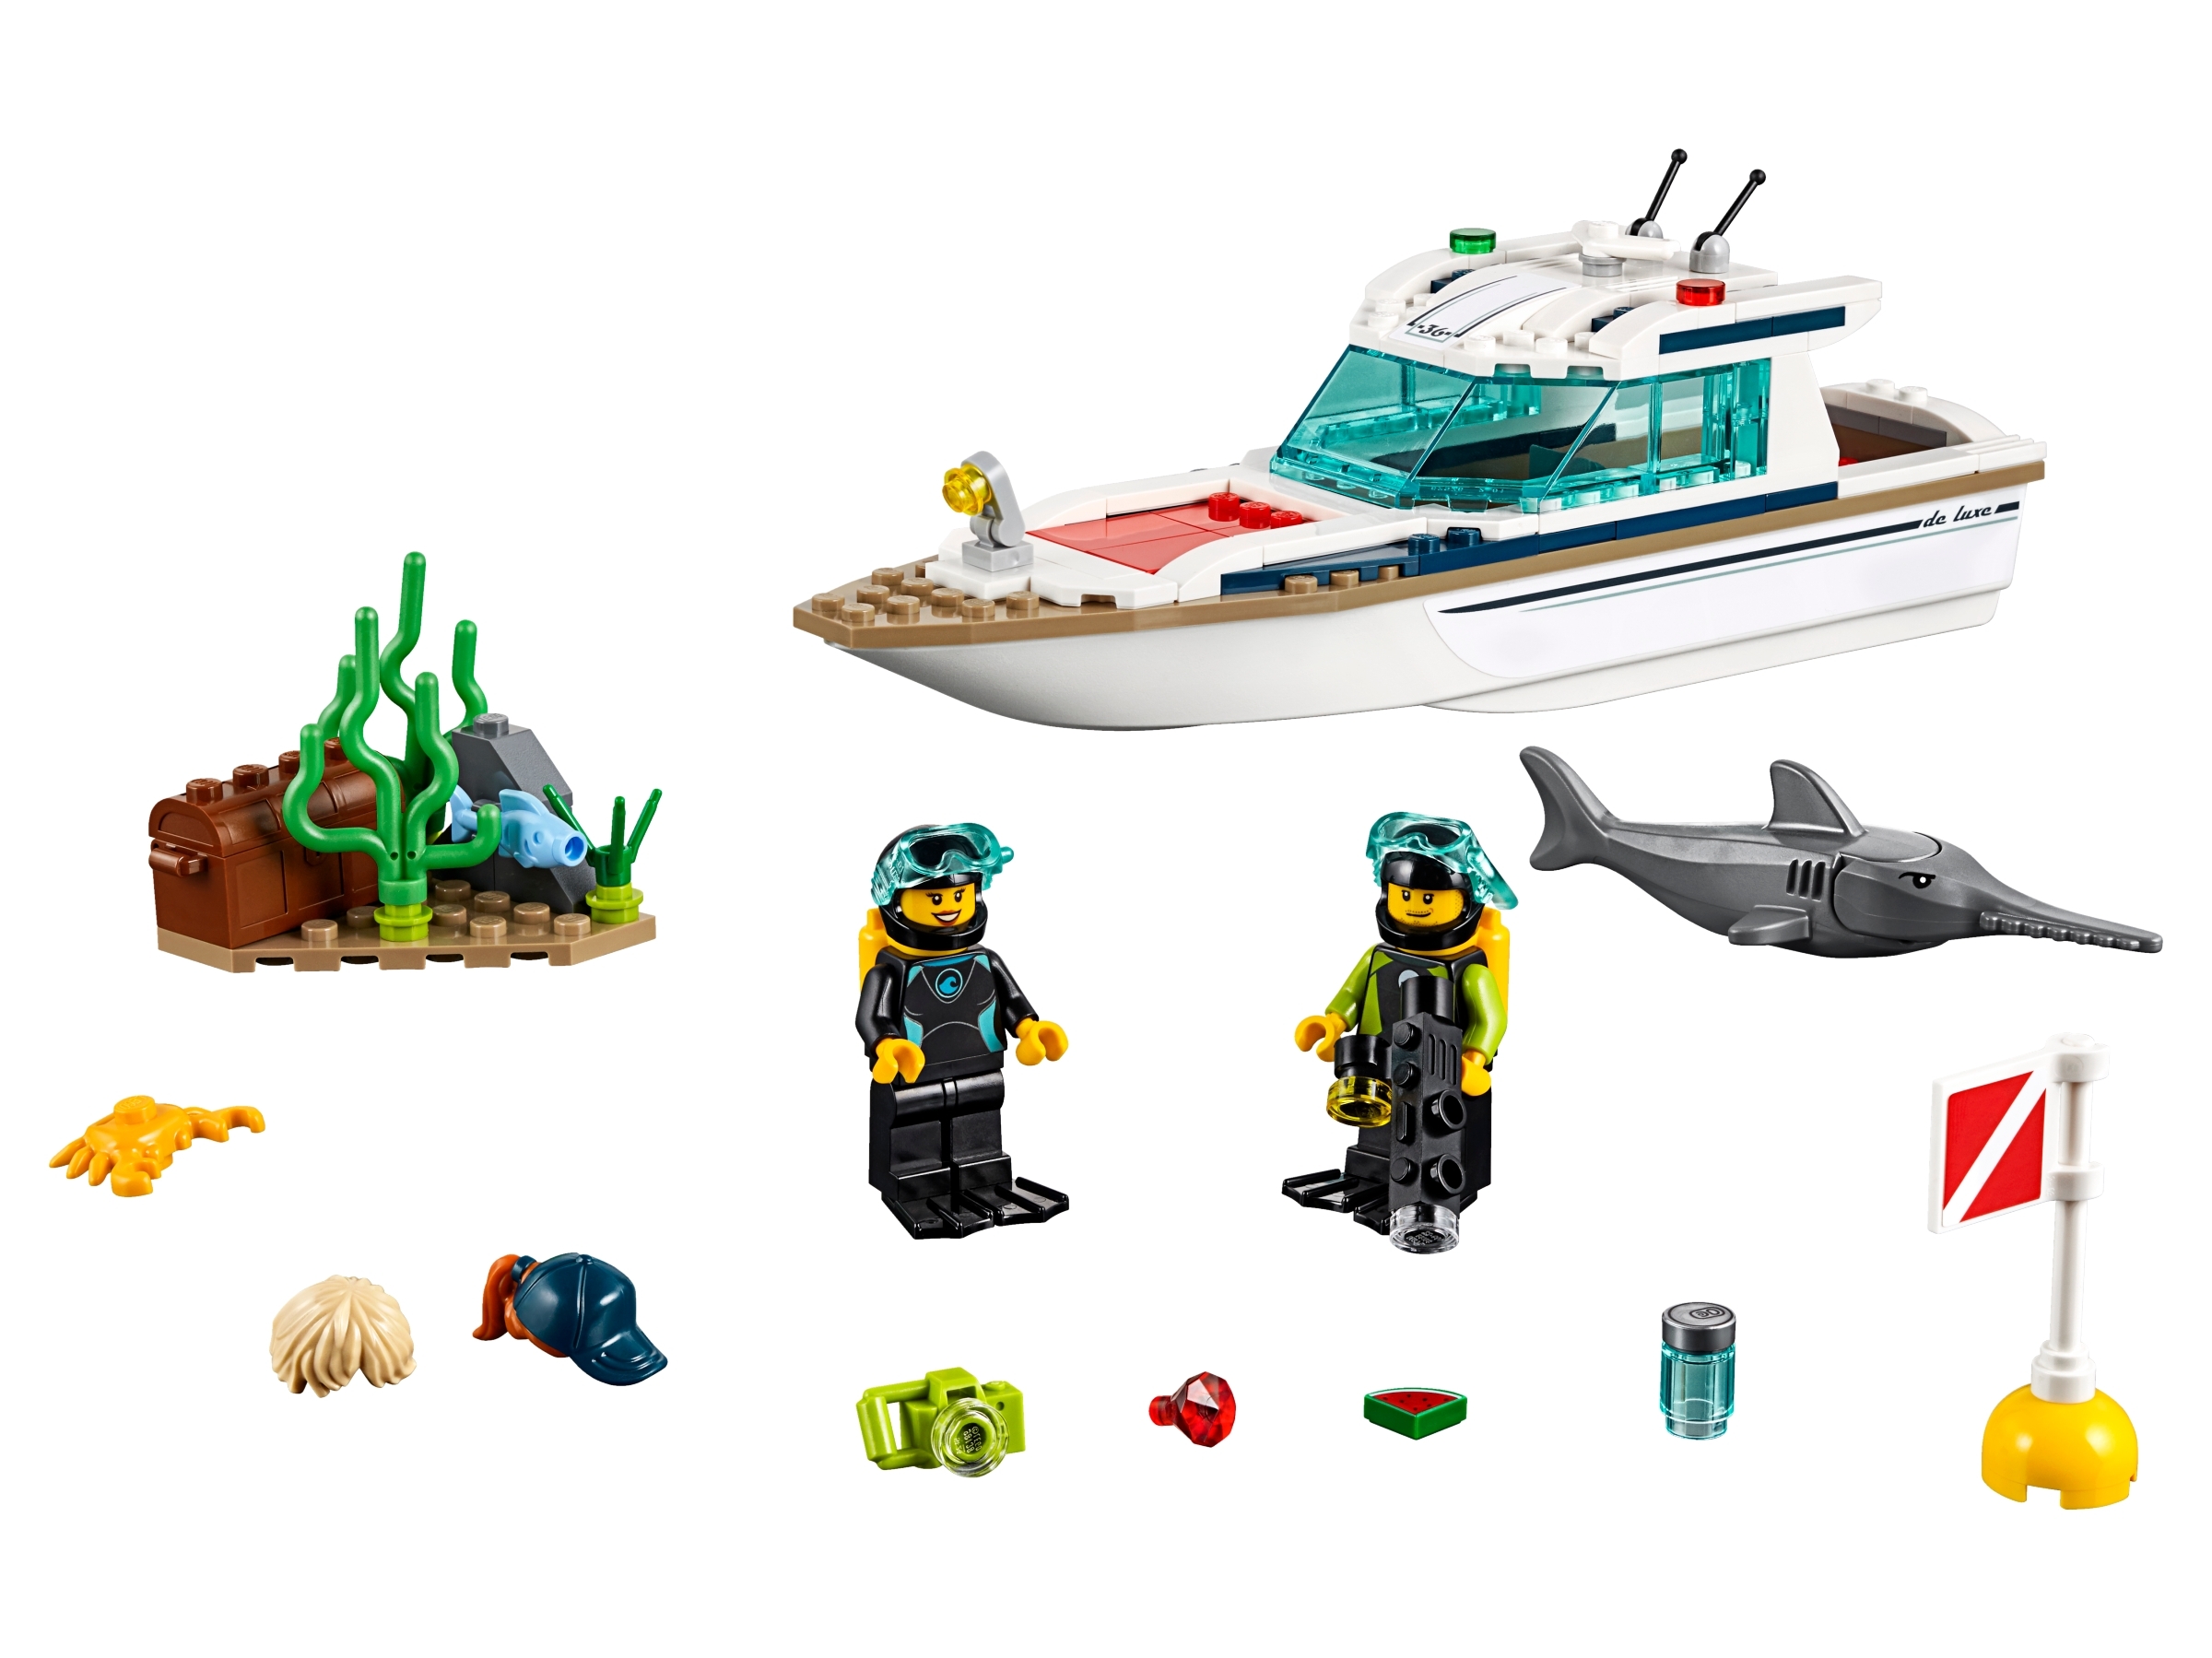 lego 60221 diving yacht